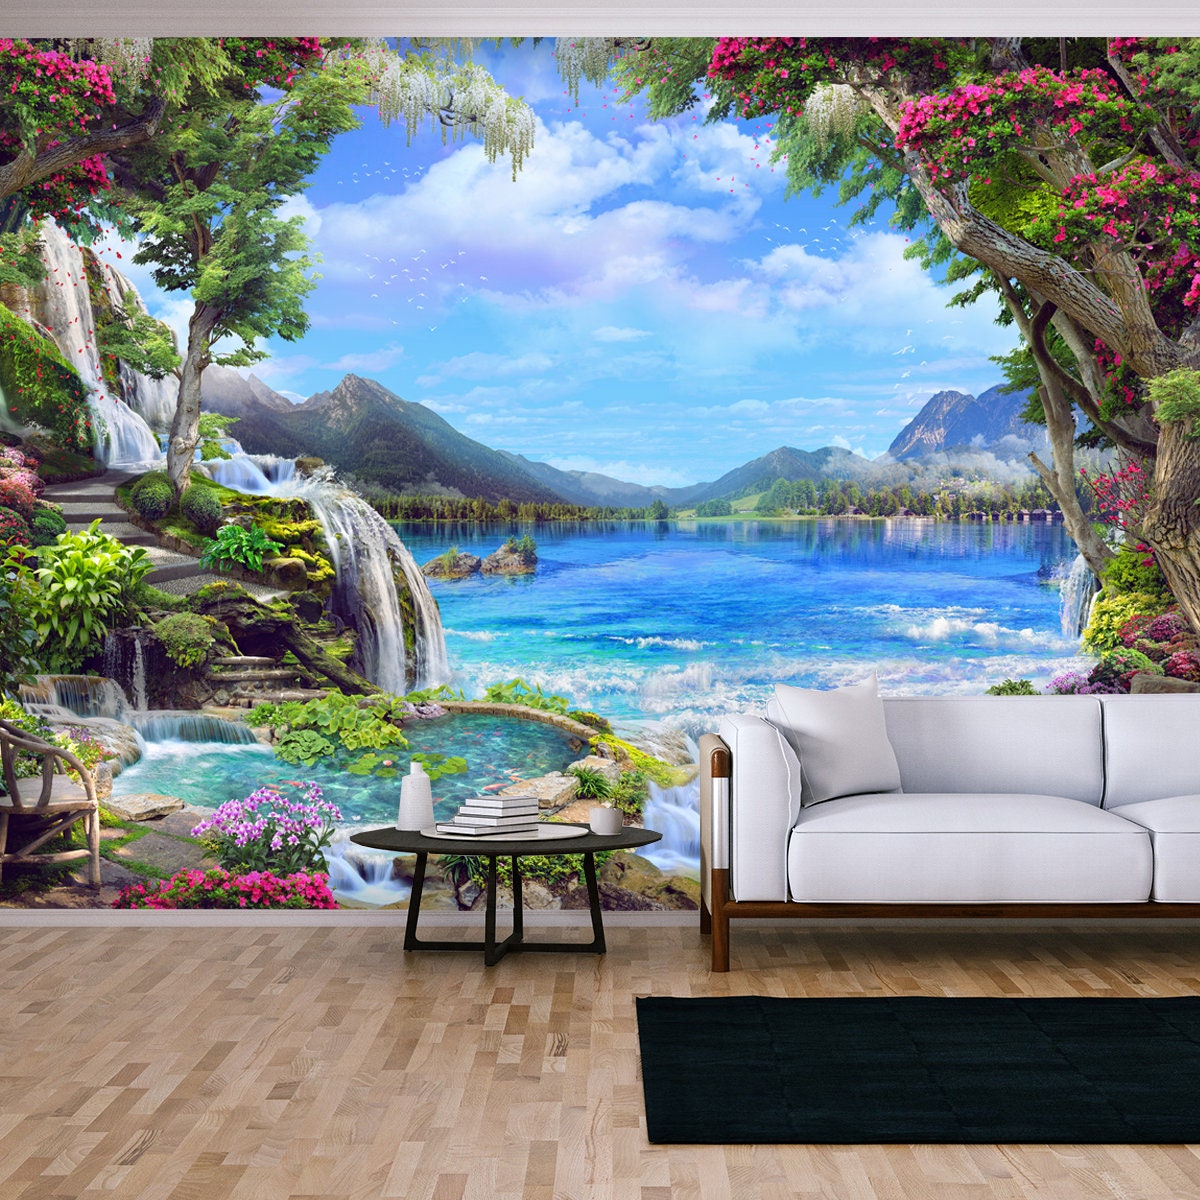 Beautiful Garden with Pink and White Flowers, Petals, Waterfall with Access to the Lake Wallpaper Living Room Mural